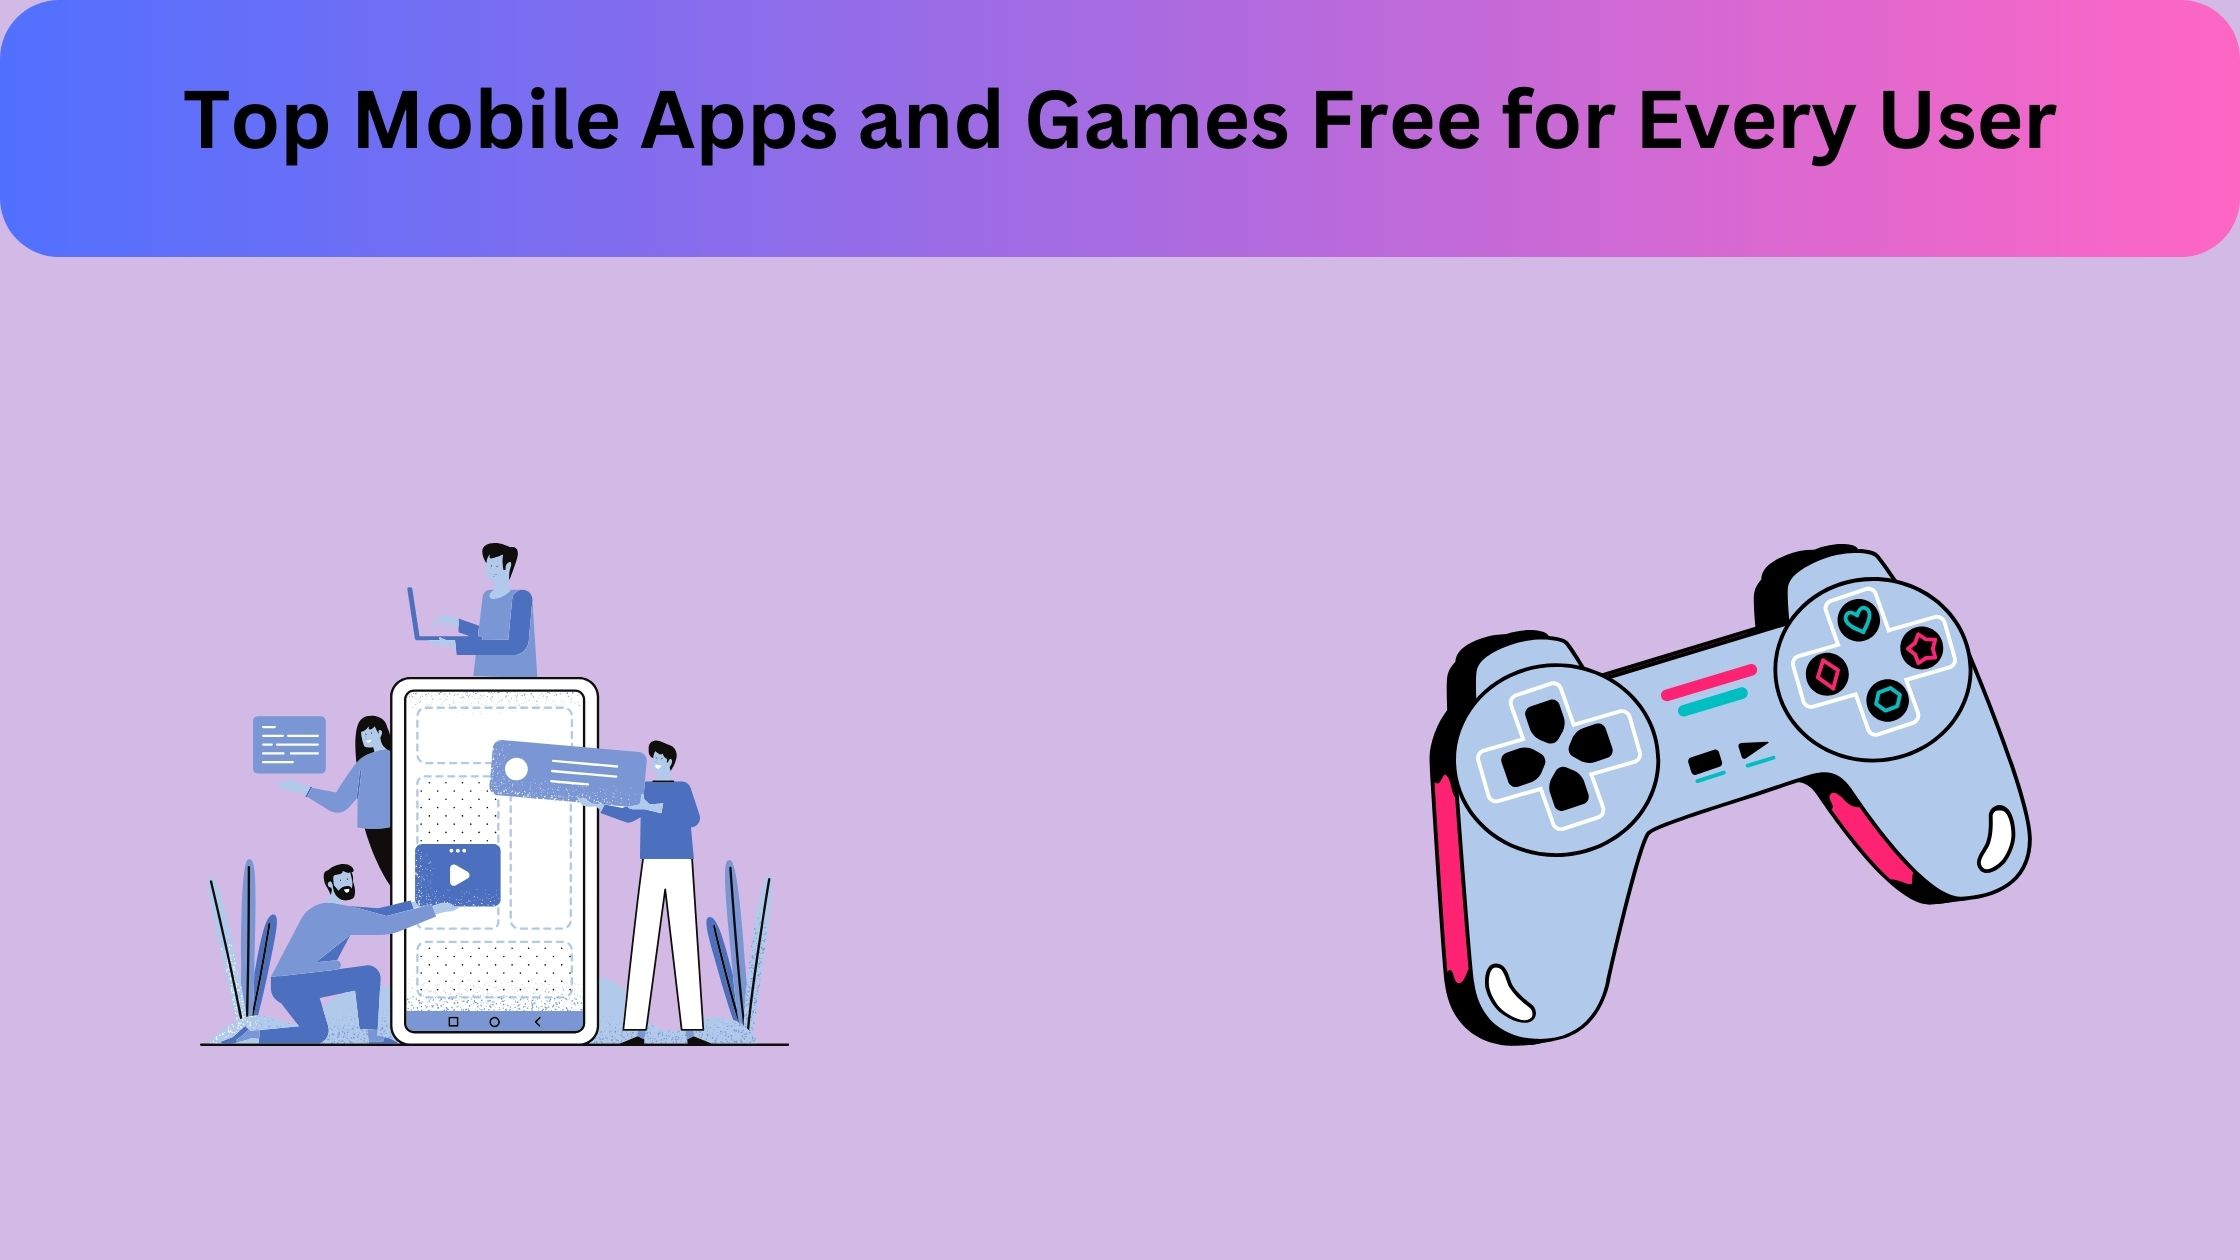 Top mobile apps and games